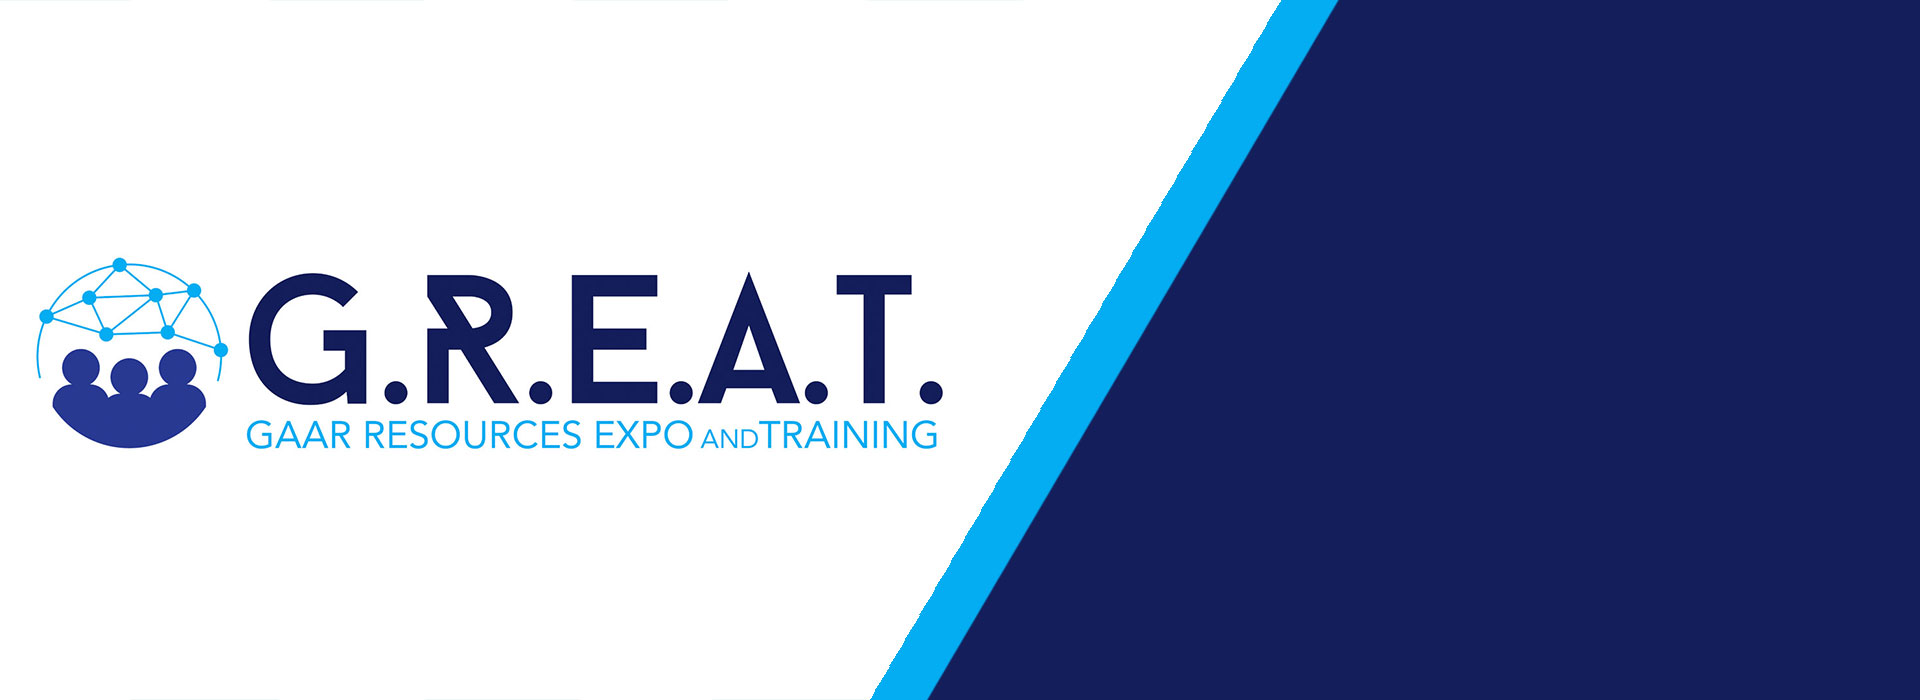 LIVE STREAM: G.R.E.A.T. Speakers & Training Sessions